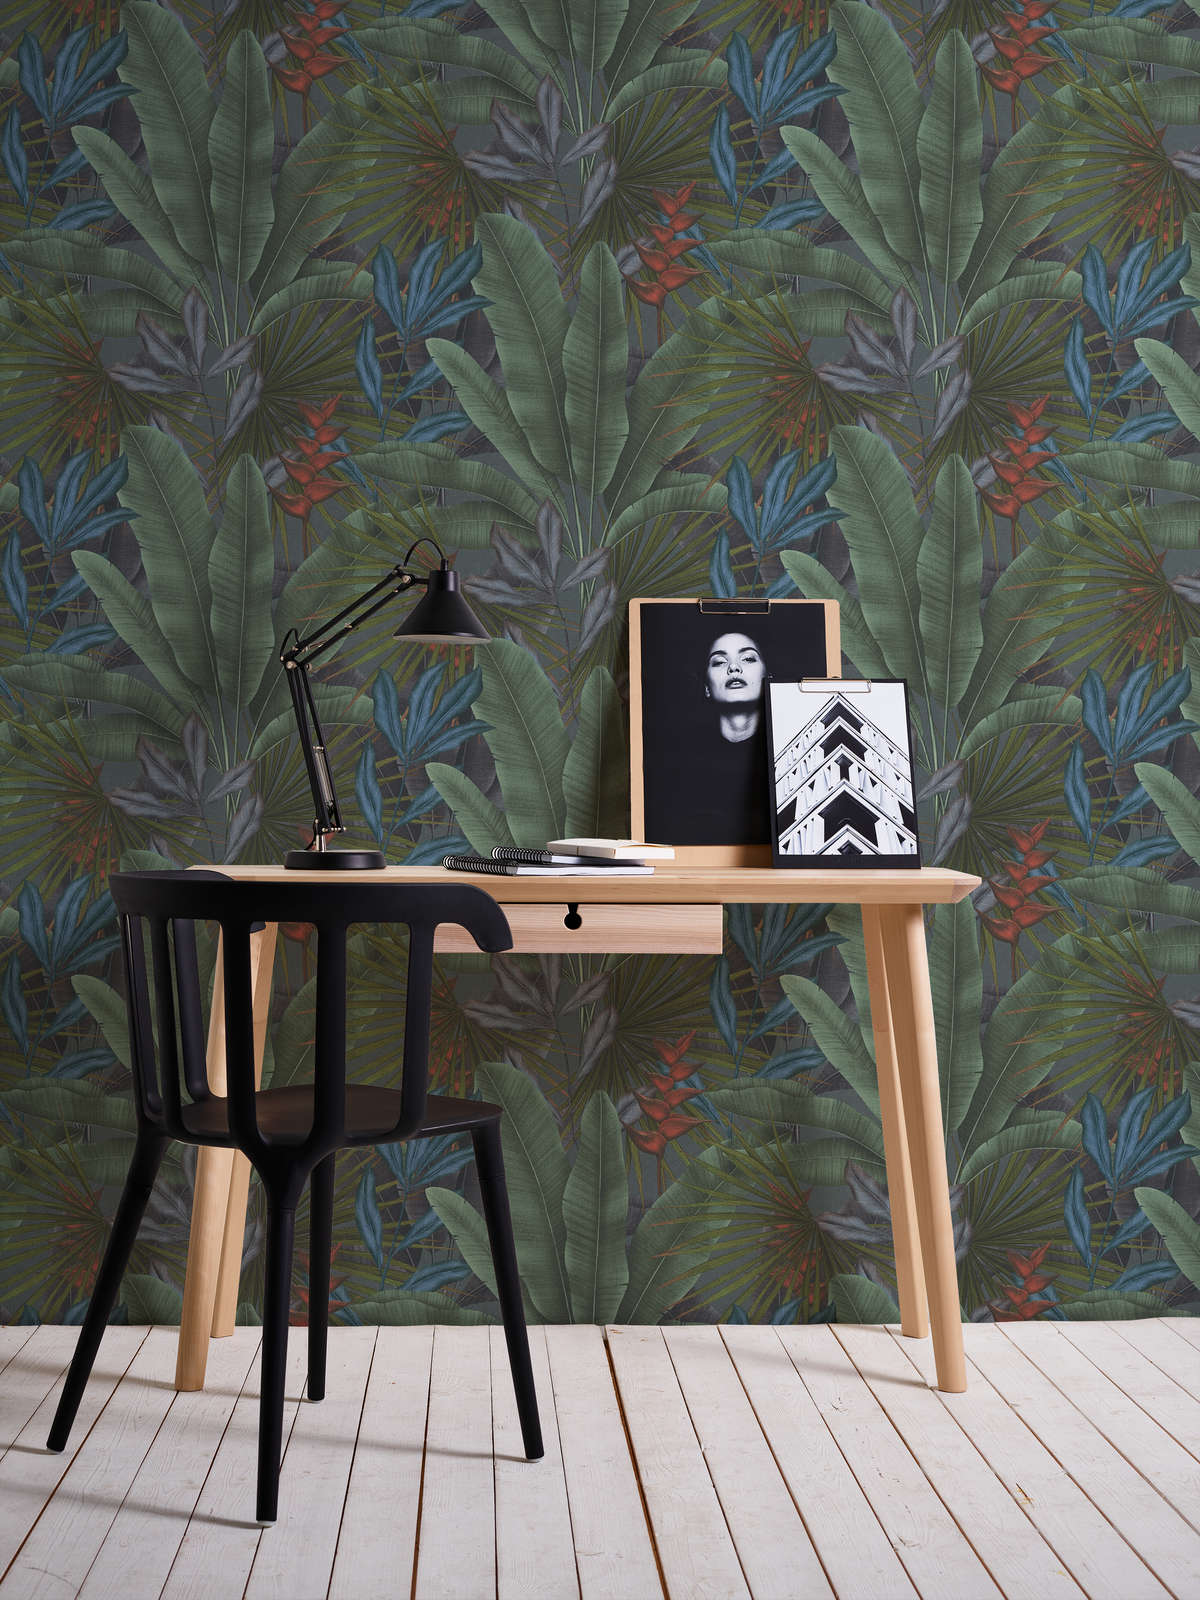             Non-woven wallpaper with jungle leaf pattern and colourful accents - grey, green, red
        